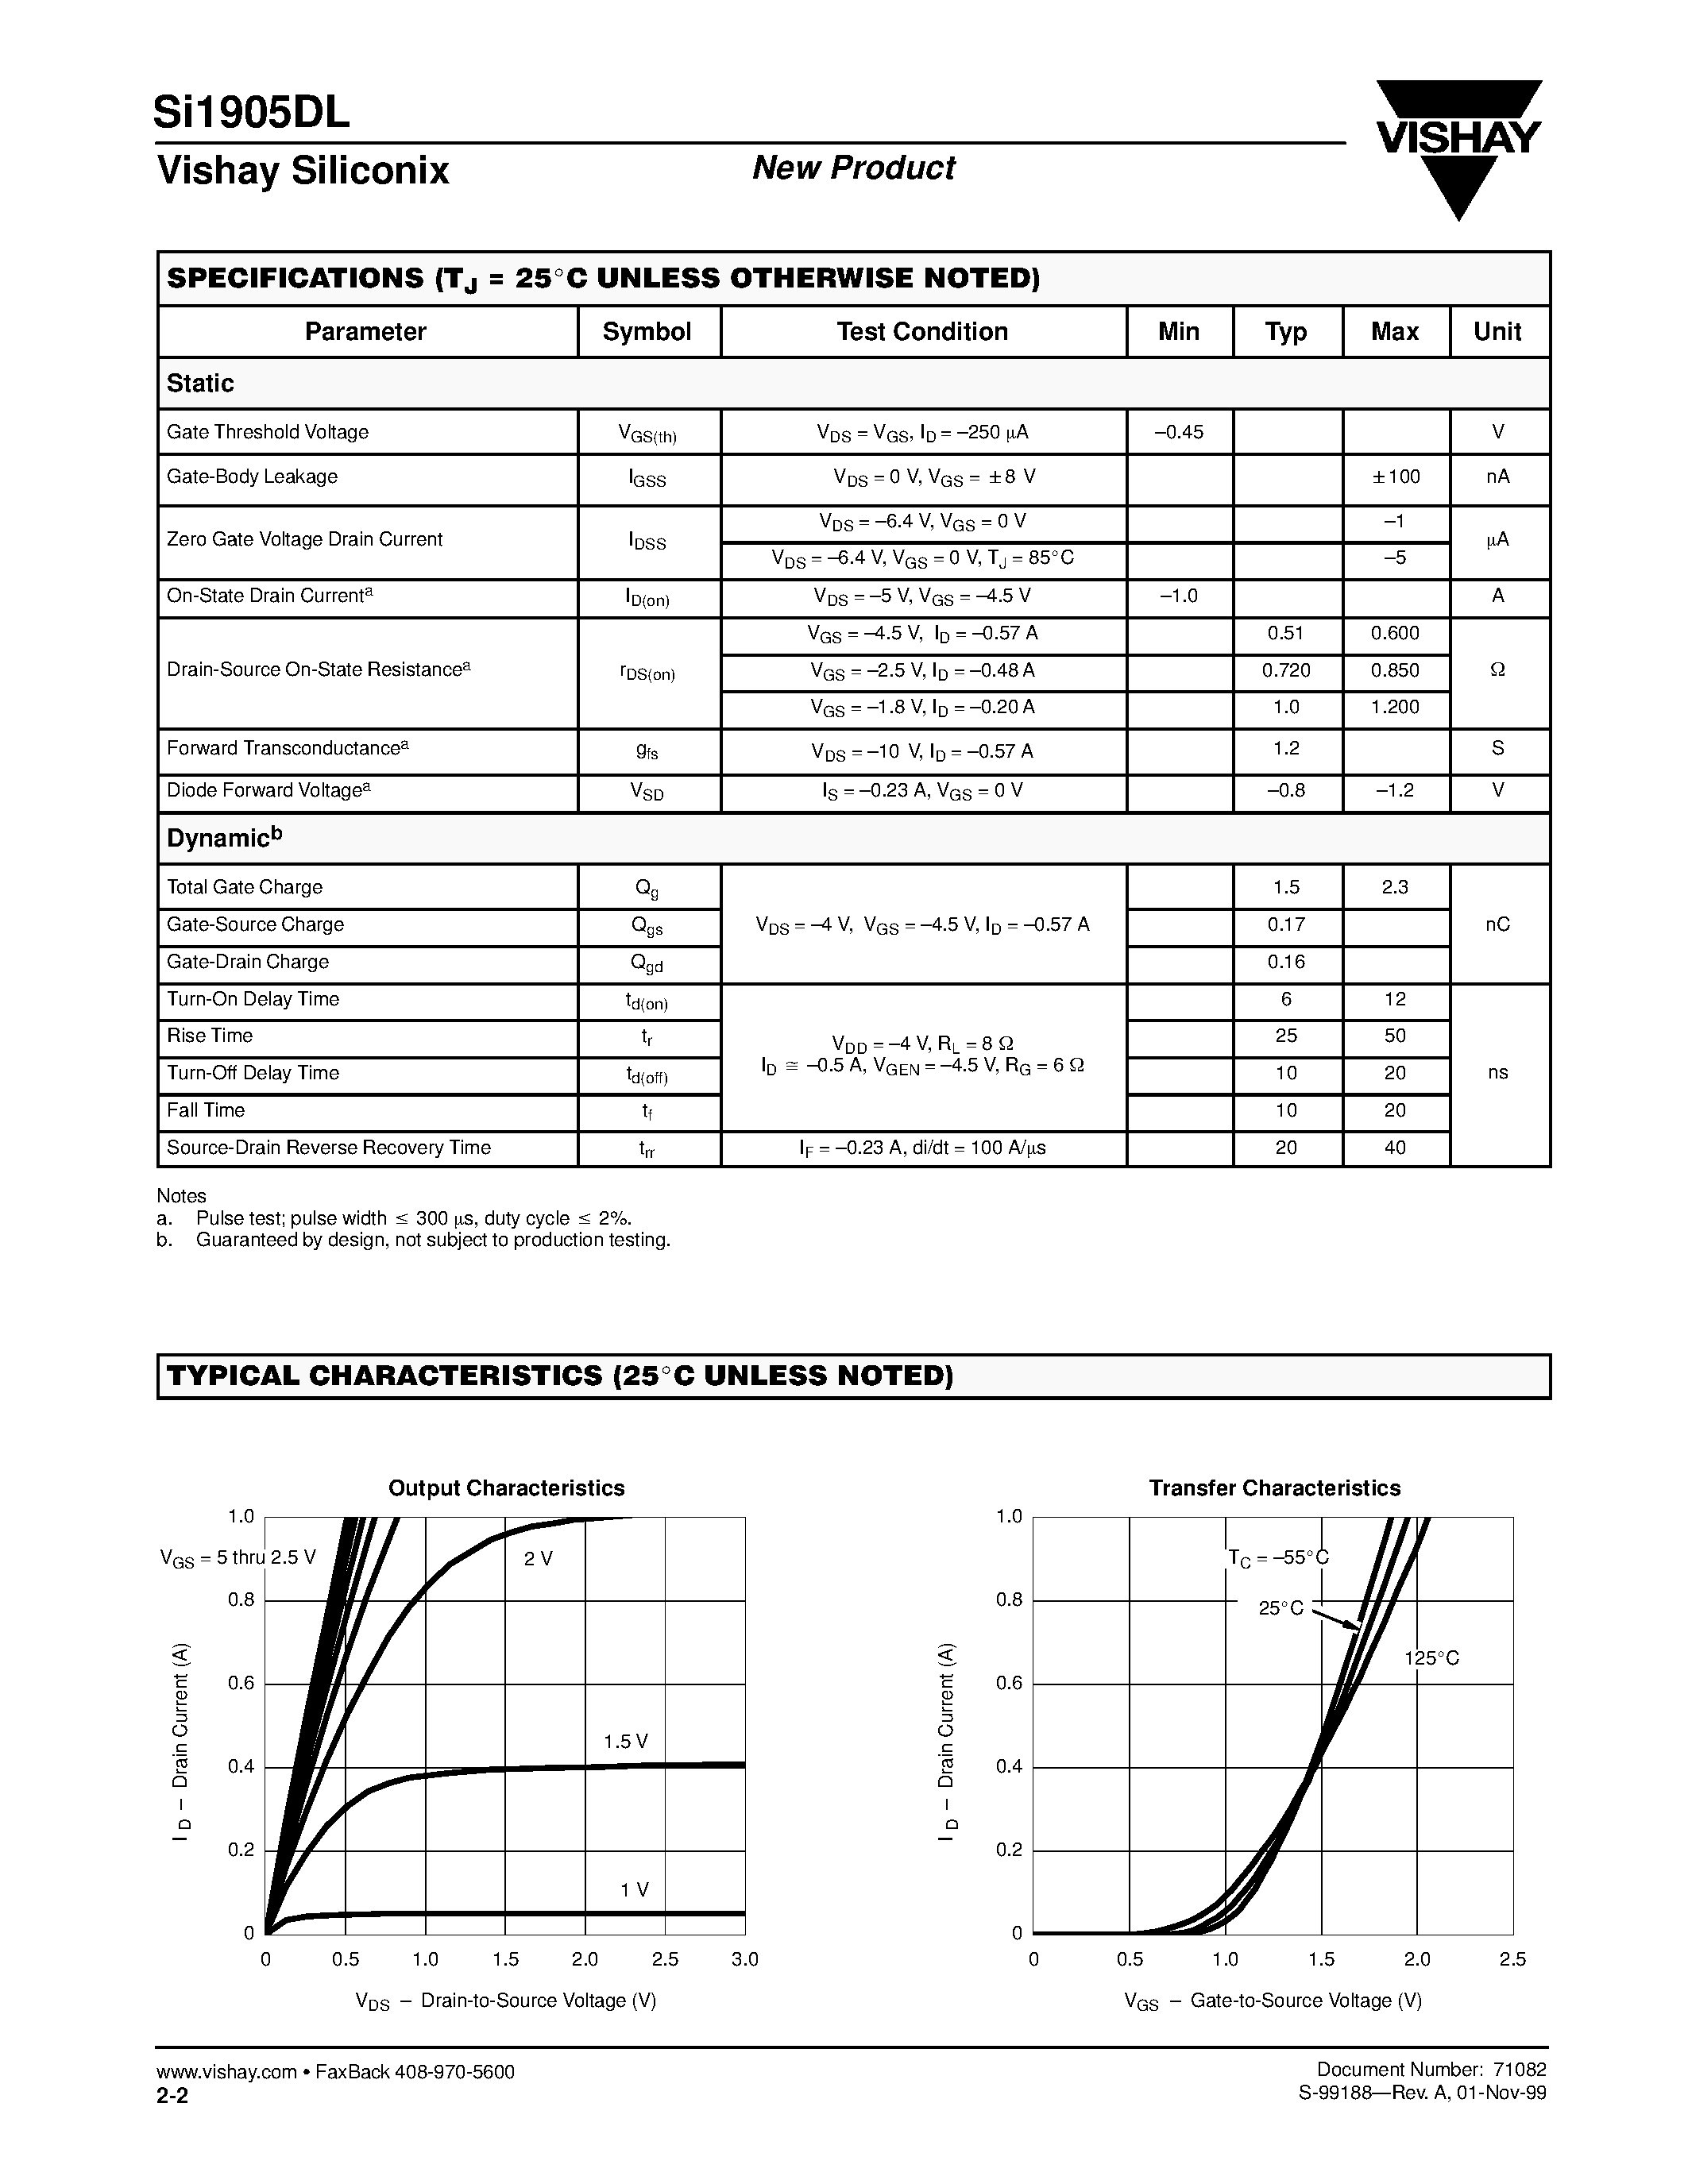 Datasheet SI1905DL - Dual P-Channel 1.8-V (G-S) MOSFET page 2